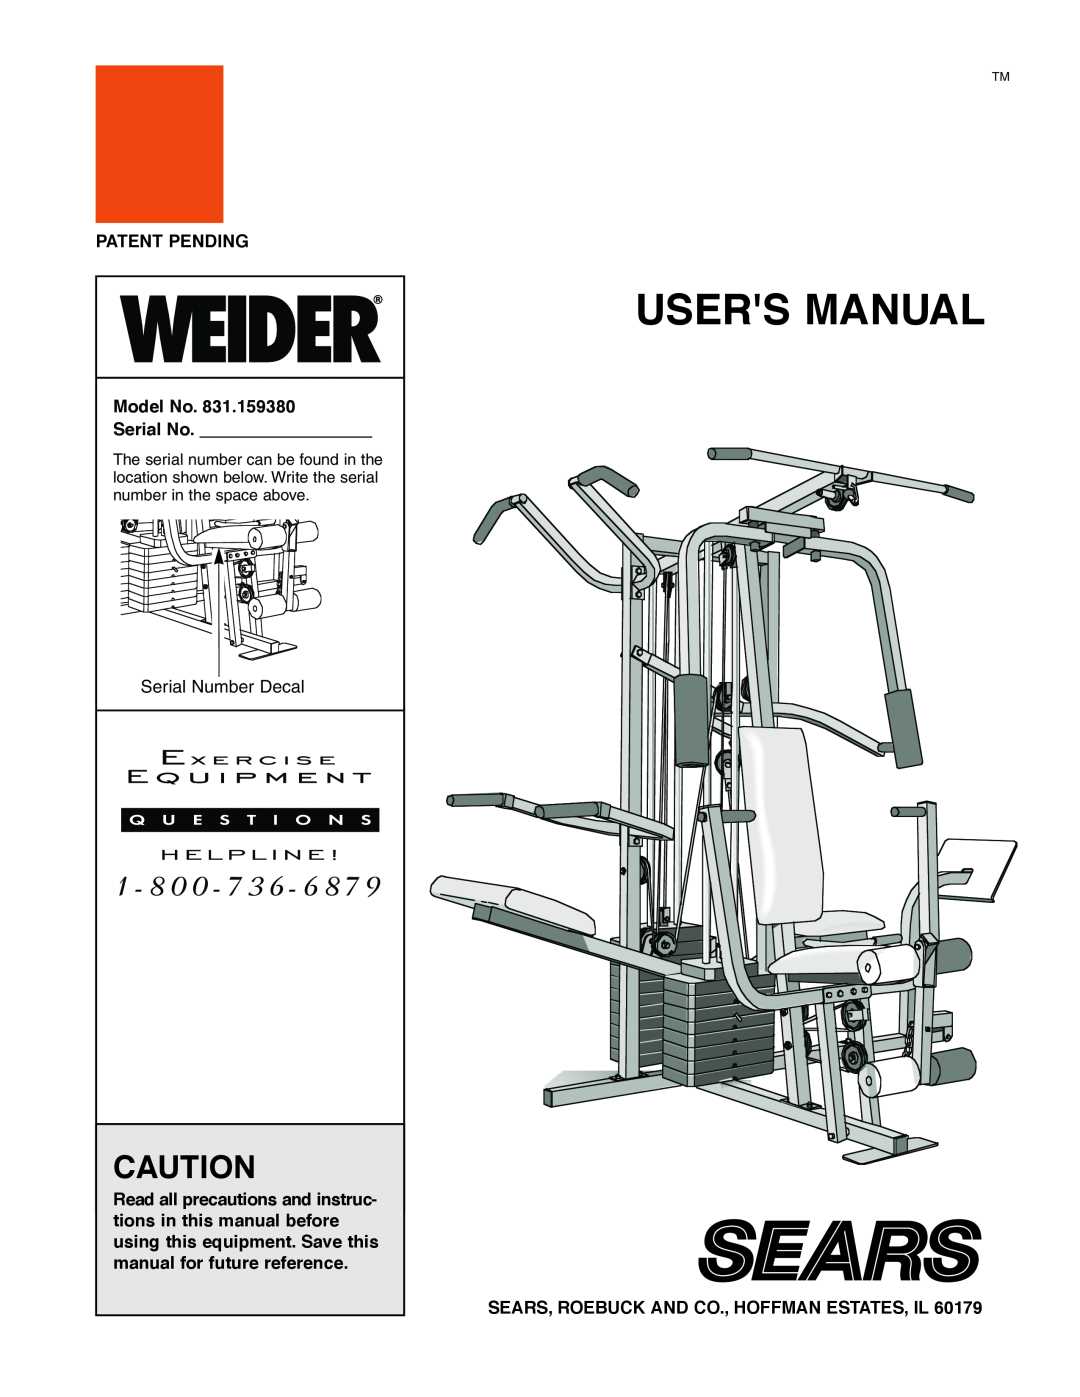 Weider 831.159380 user manual PATENT PENDING Model No Serial No, Sears, Roebuck And Co., Hoffman Estates, Il, Users Manual 